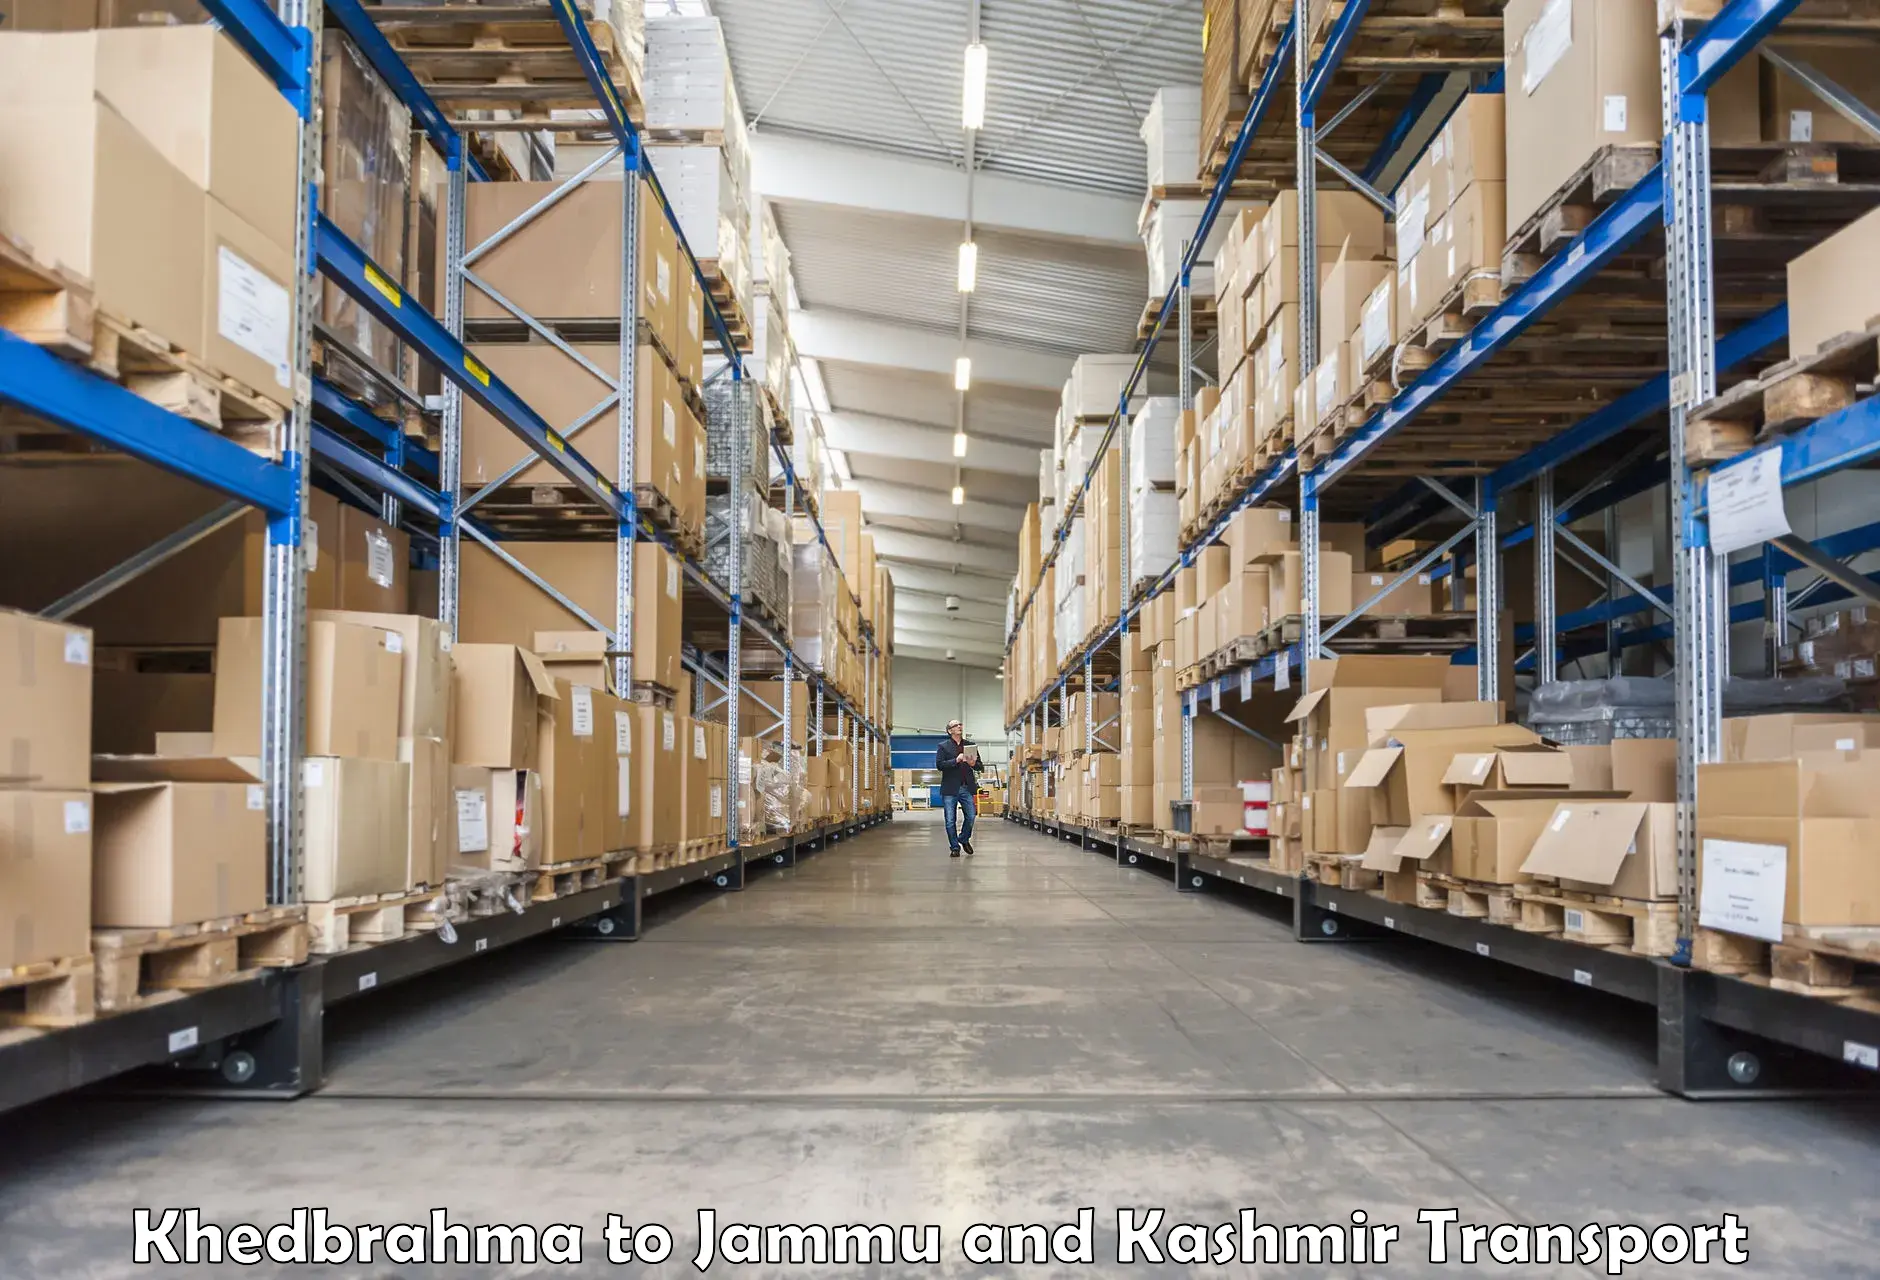 Part load transport service in India Khedbrahma to Udhampur